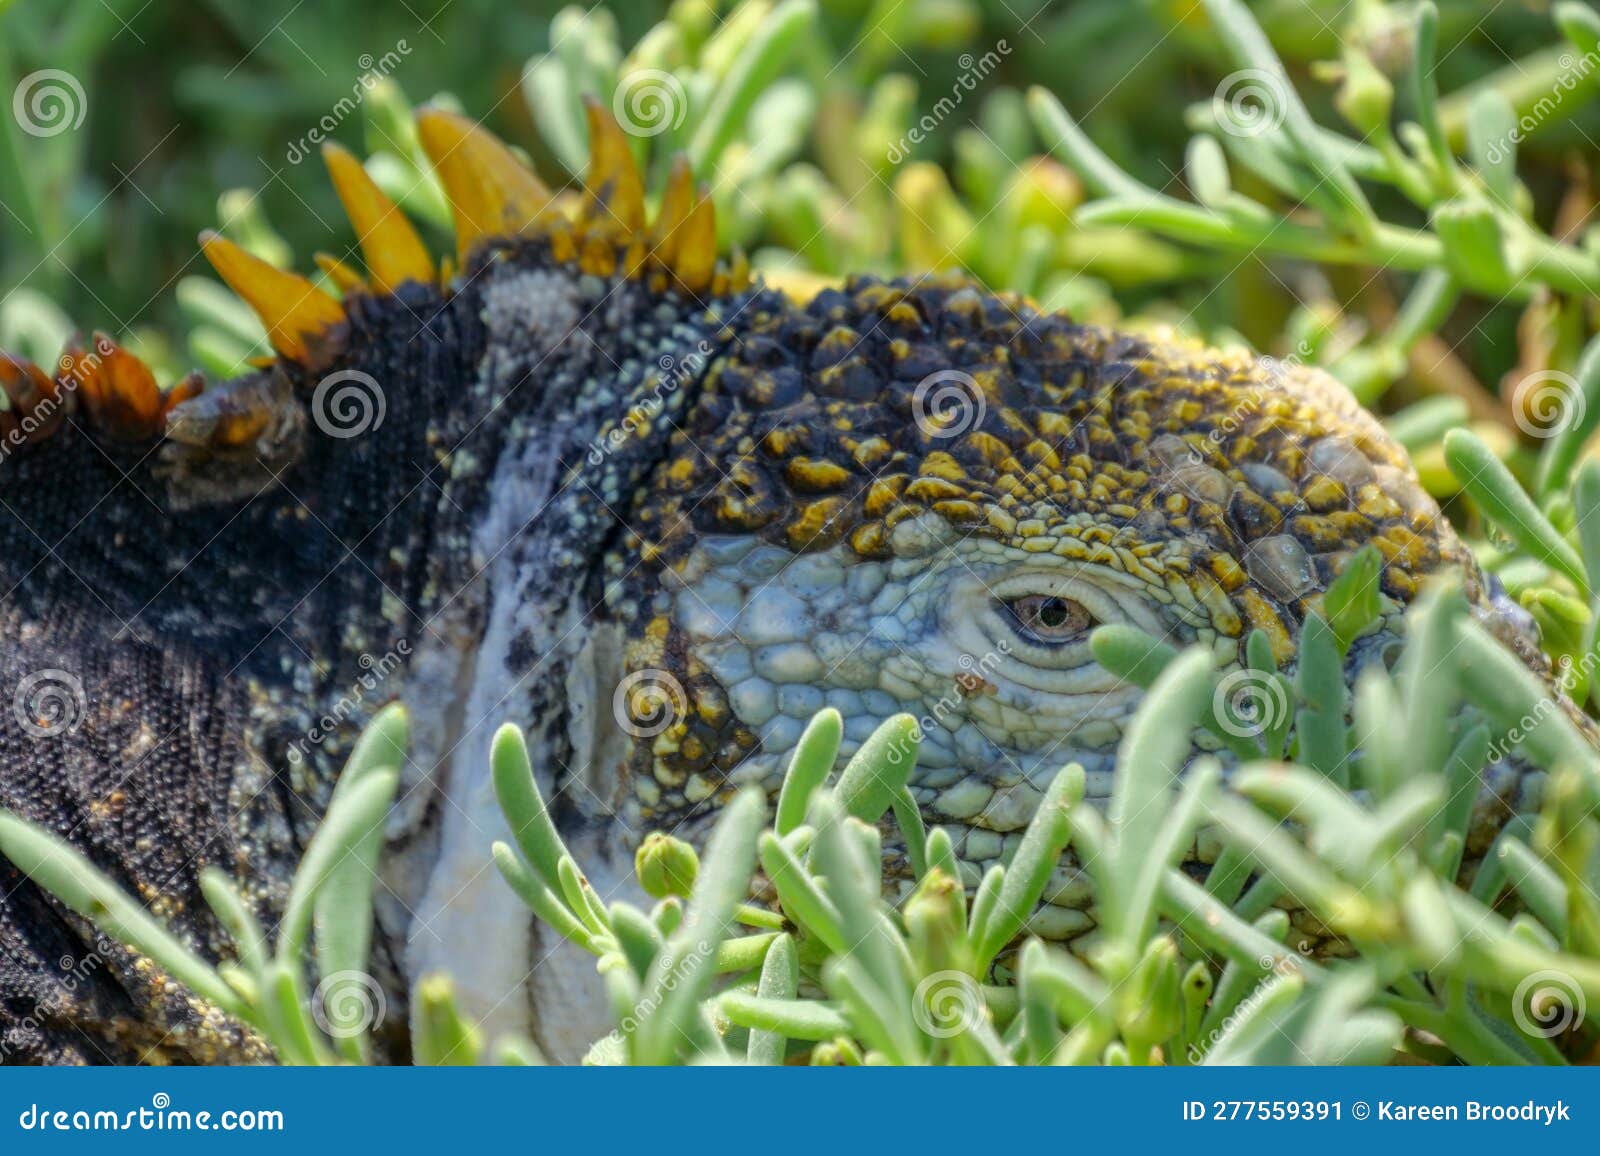 close up of the side profile and eye of a bright yellow adult land iguana, iguana terrestre between green cactus plants at south